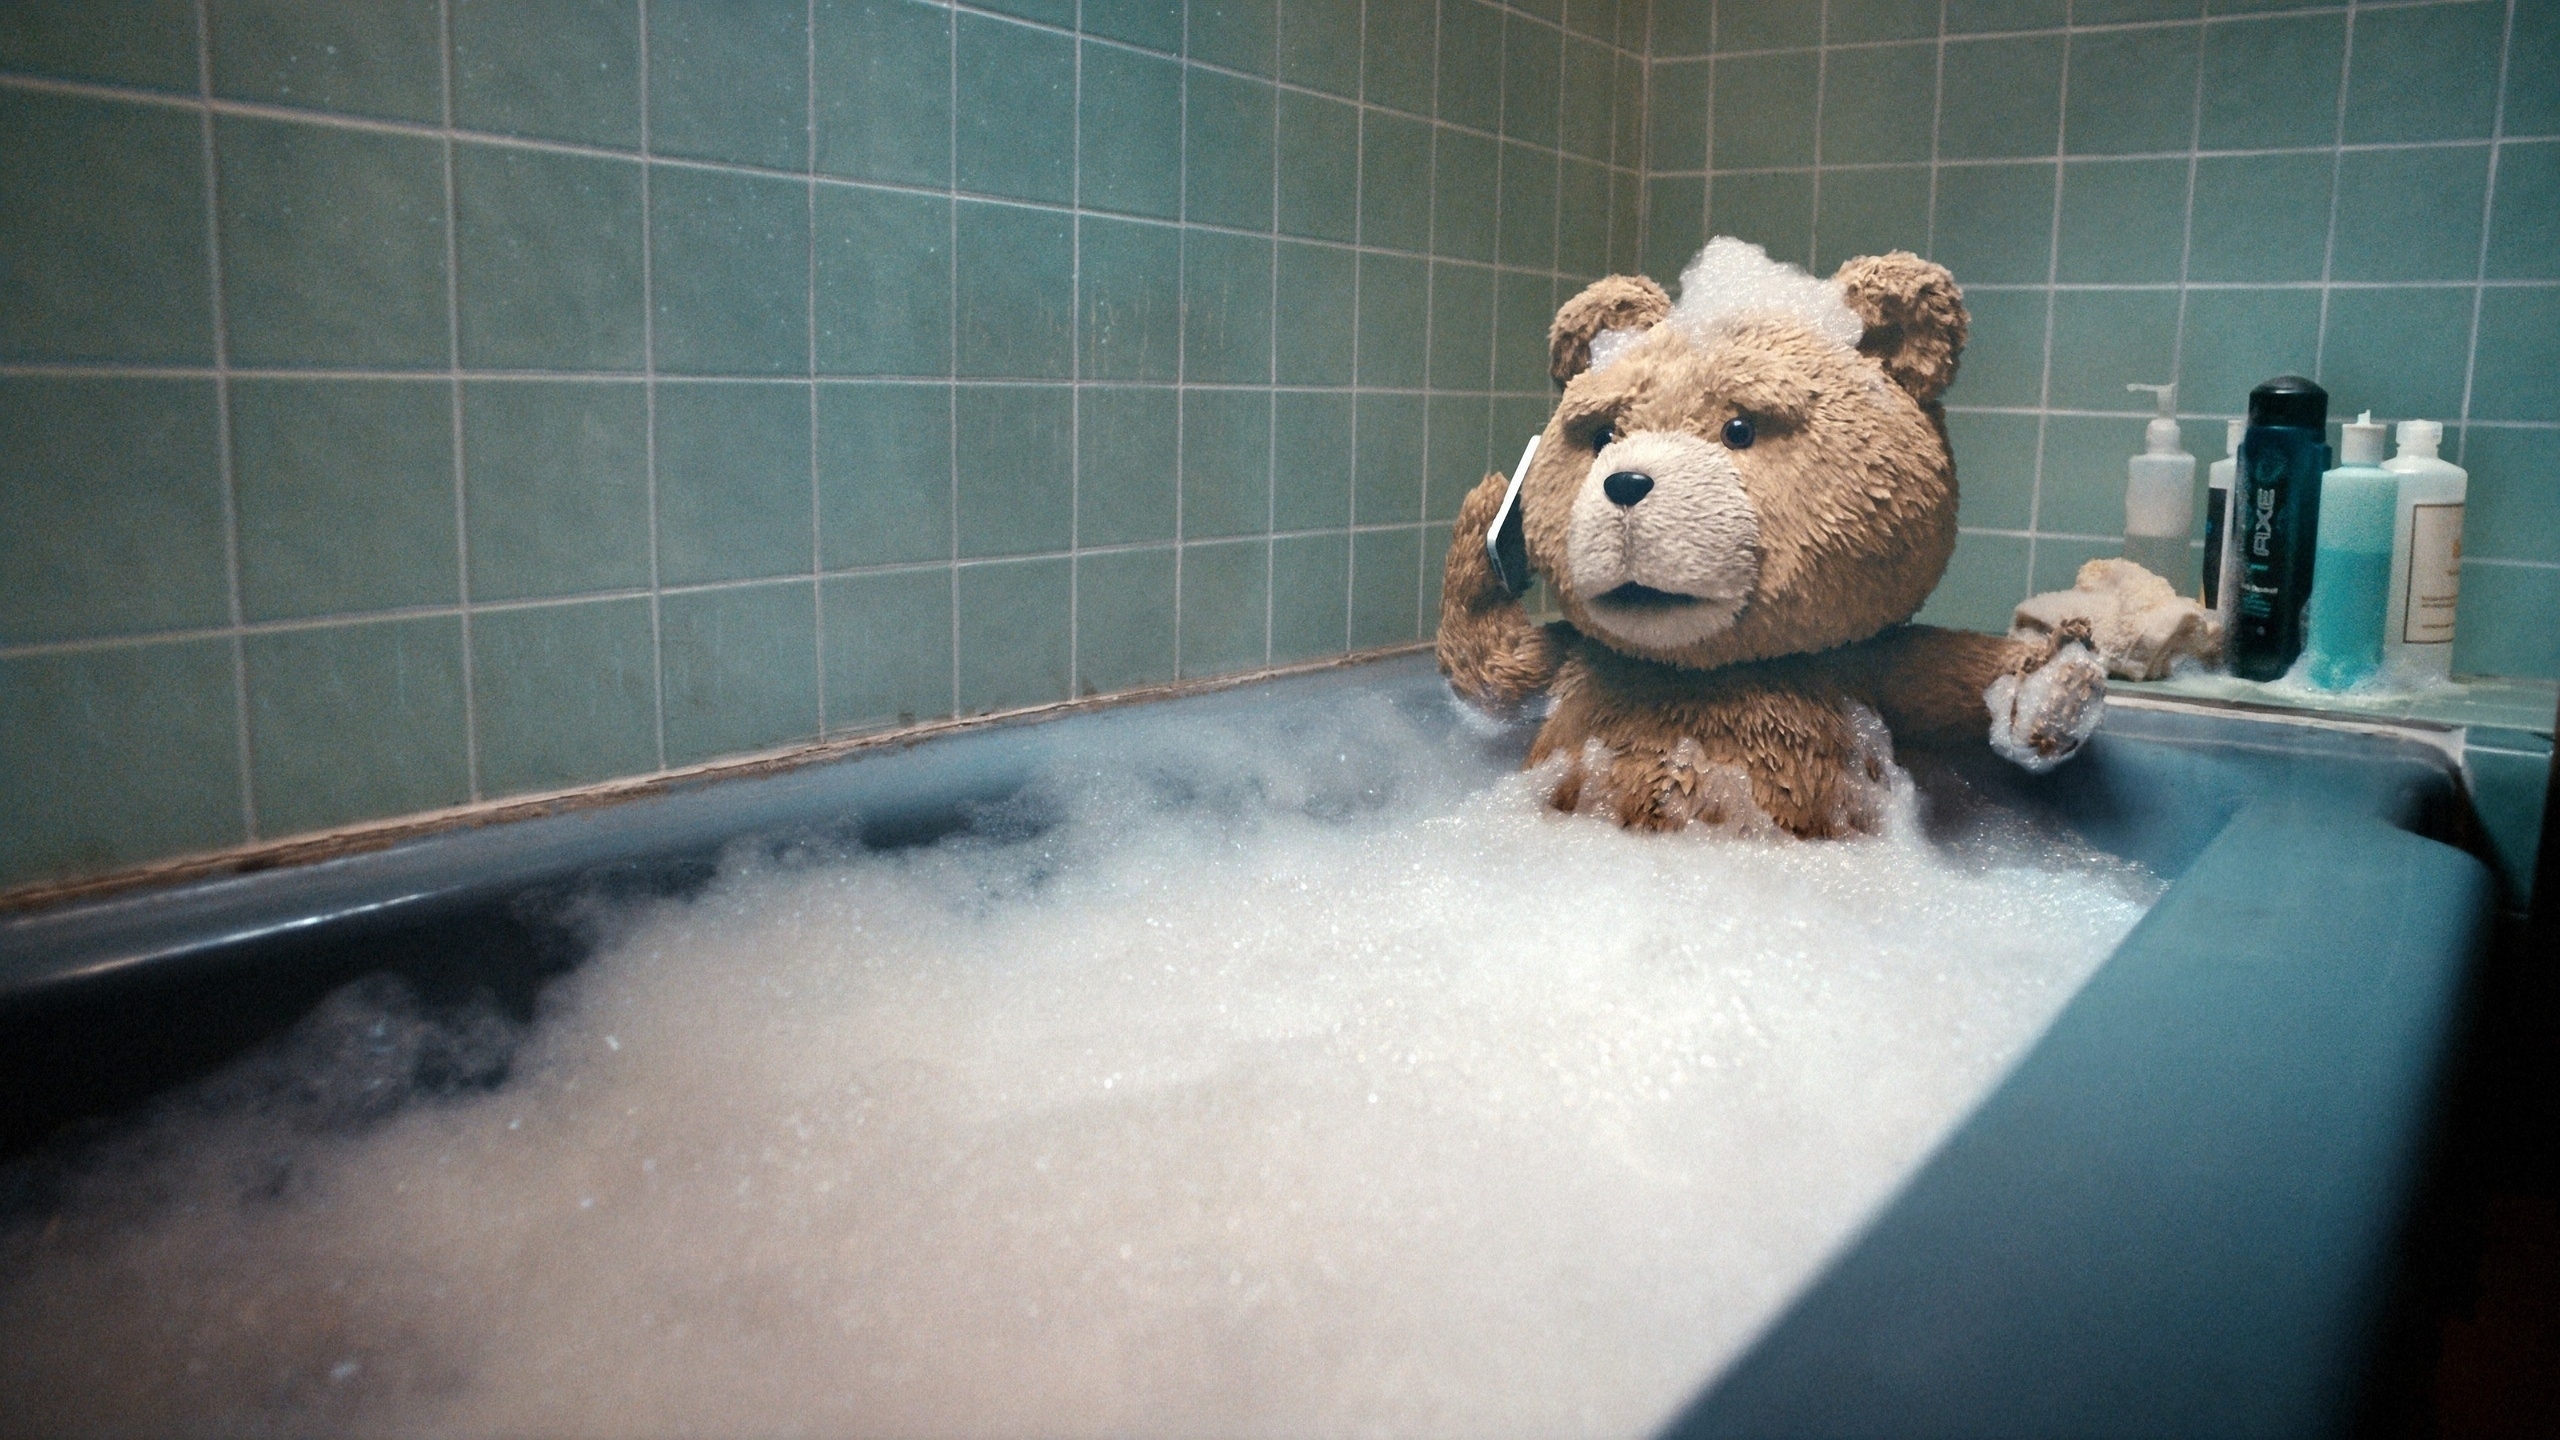 Ted taking a Bath for 2560x1440 HDTV resolution